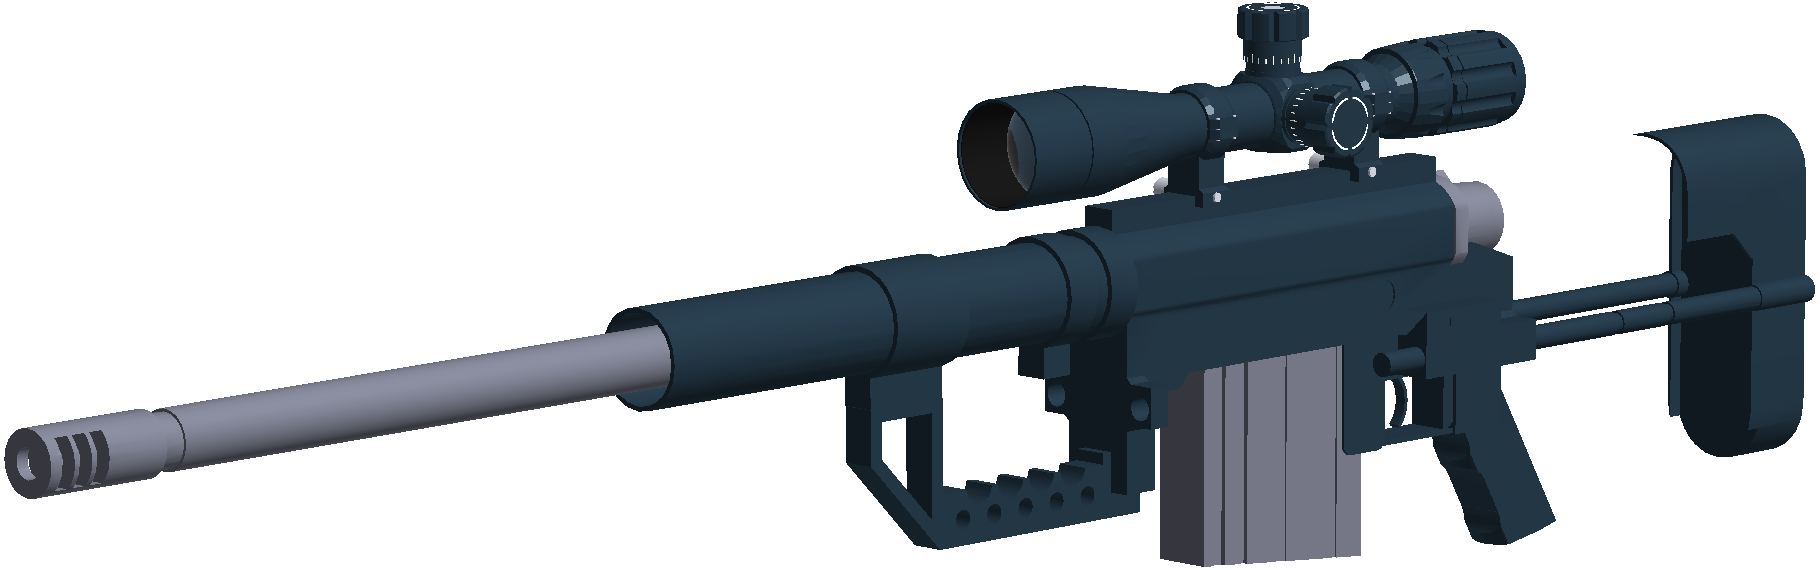 Intervention Phantom Forces Wiki Fandom - how do good at sniper for pf roblox